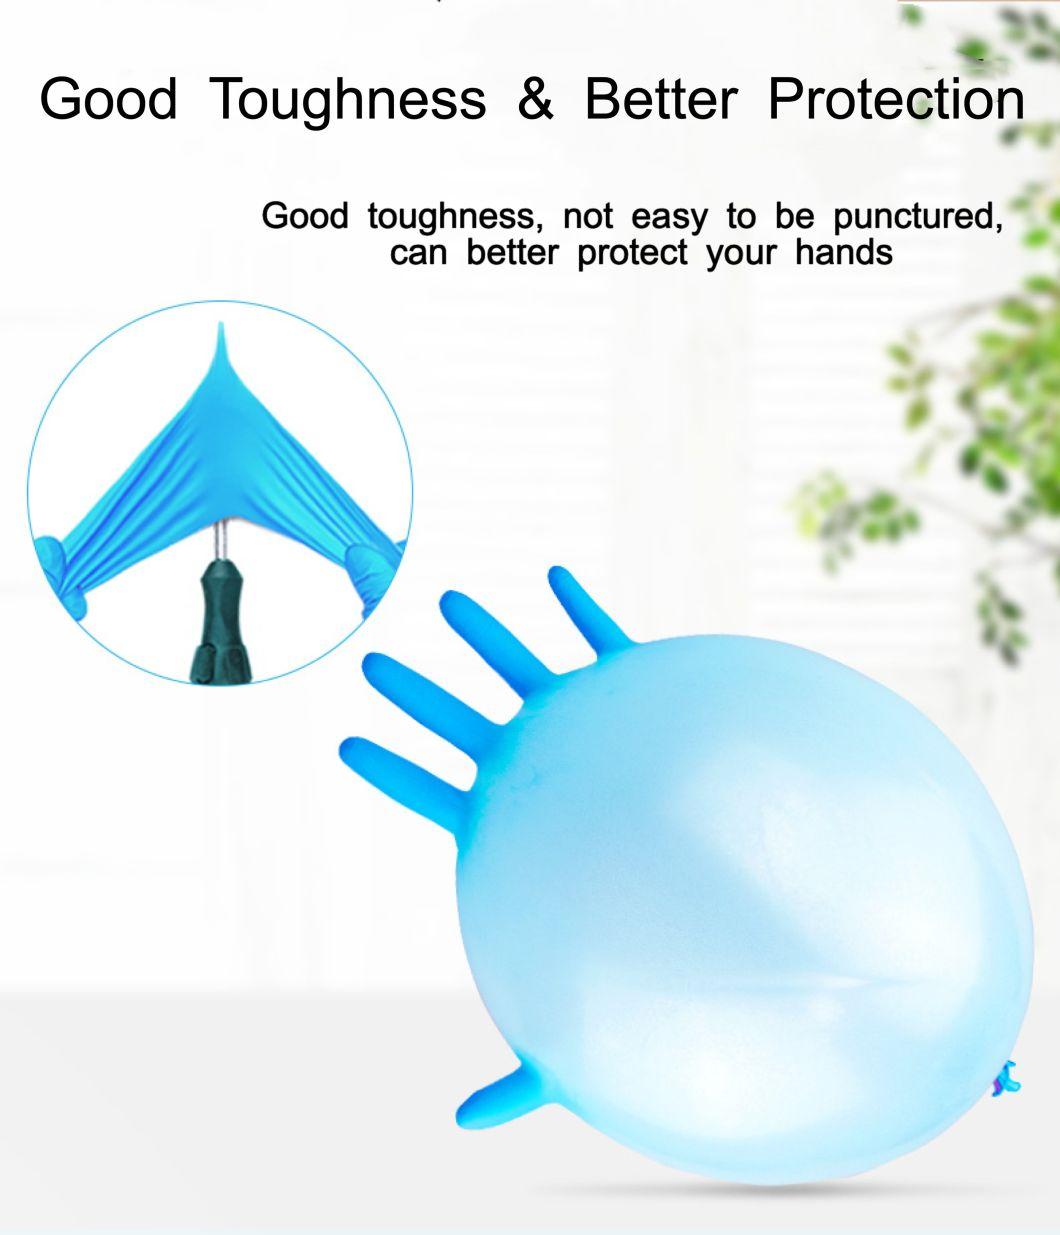 Anti-Virus Disposable Powder Free Nitrile Gloves for All Ages